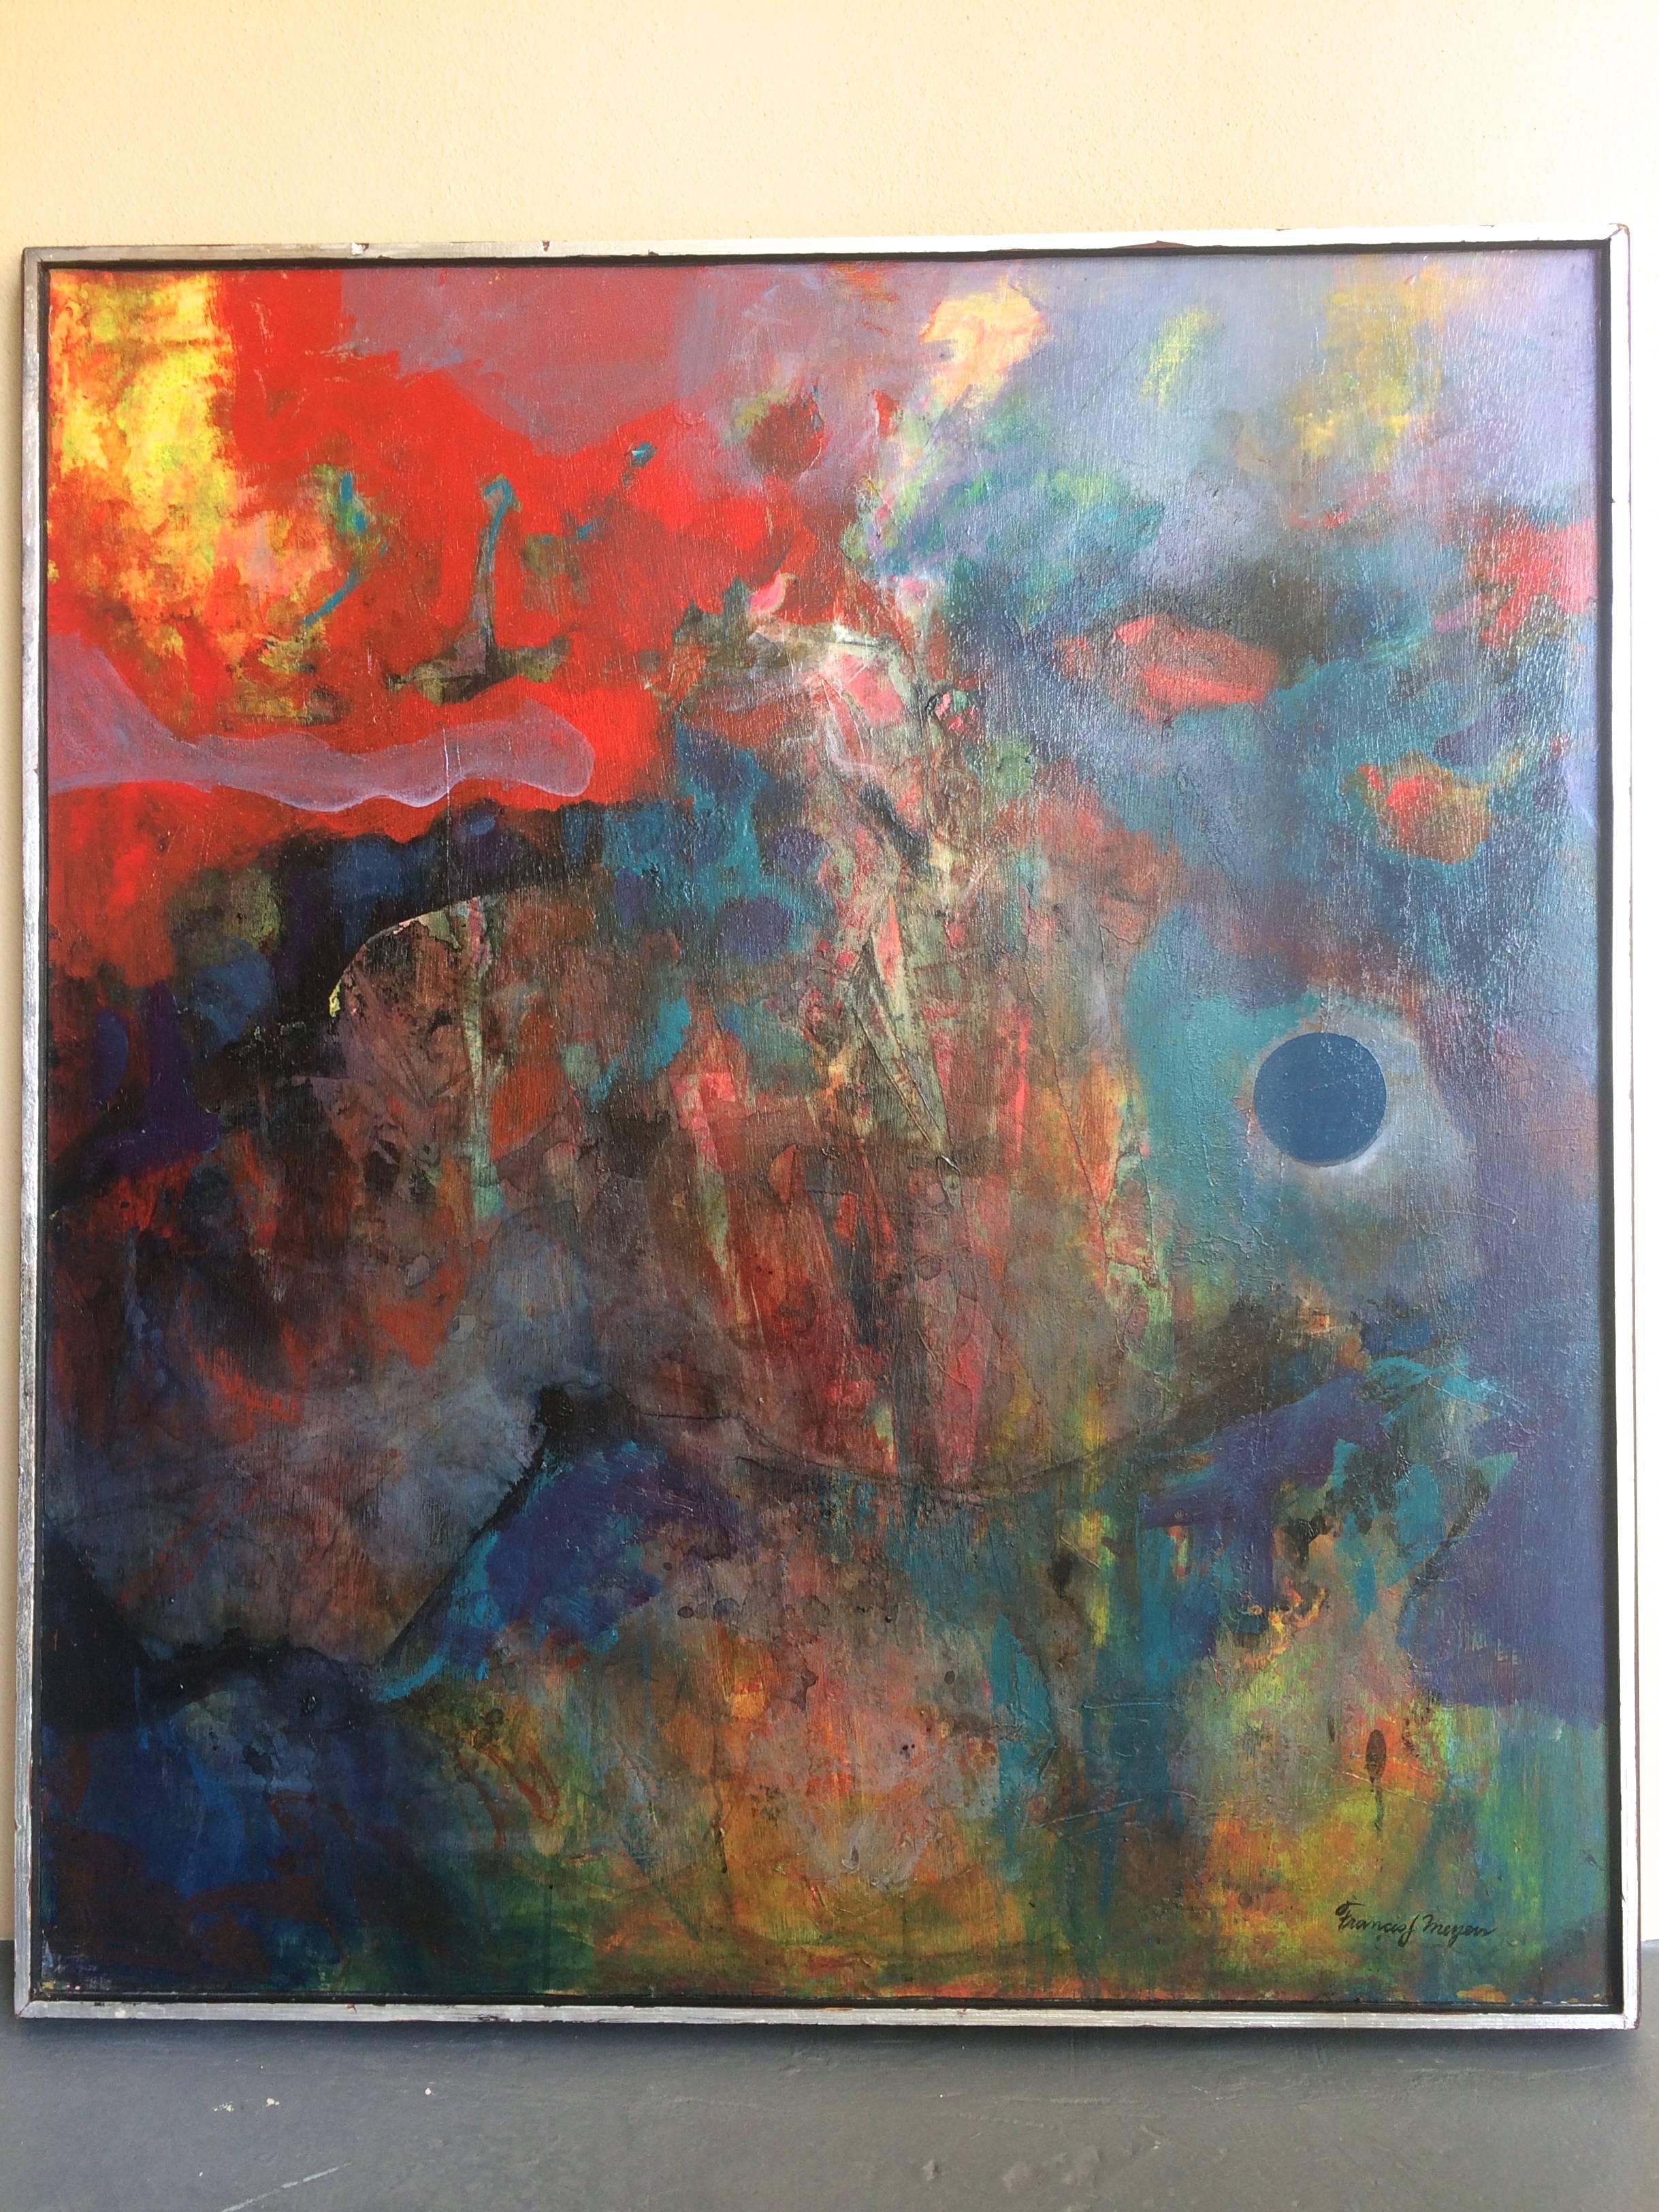 Homage To Beethoven Abstract Composition - Painting by Francis J. Meyers